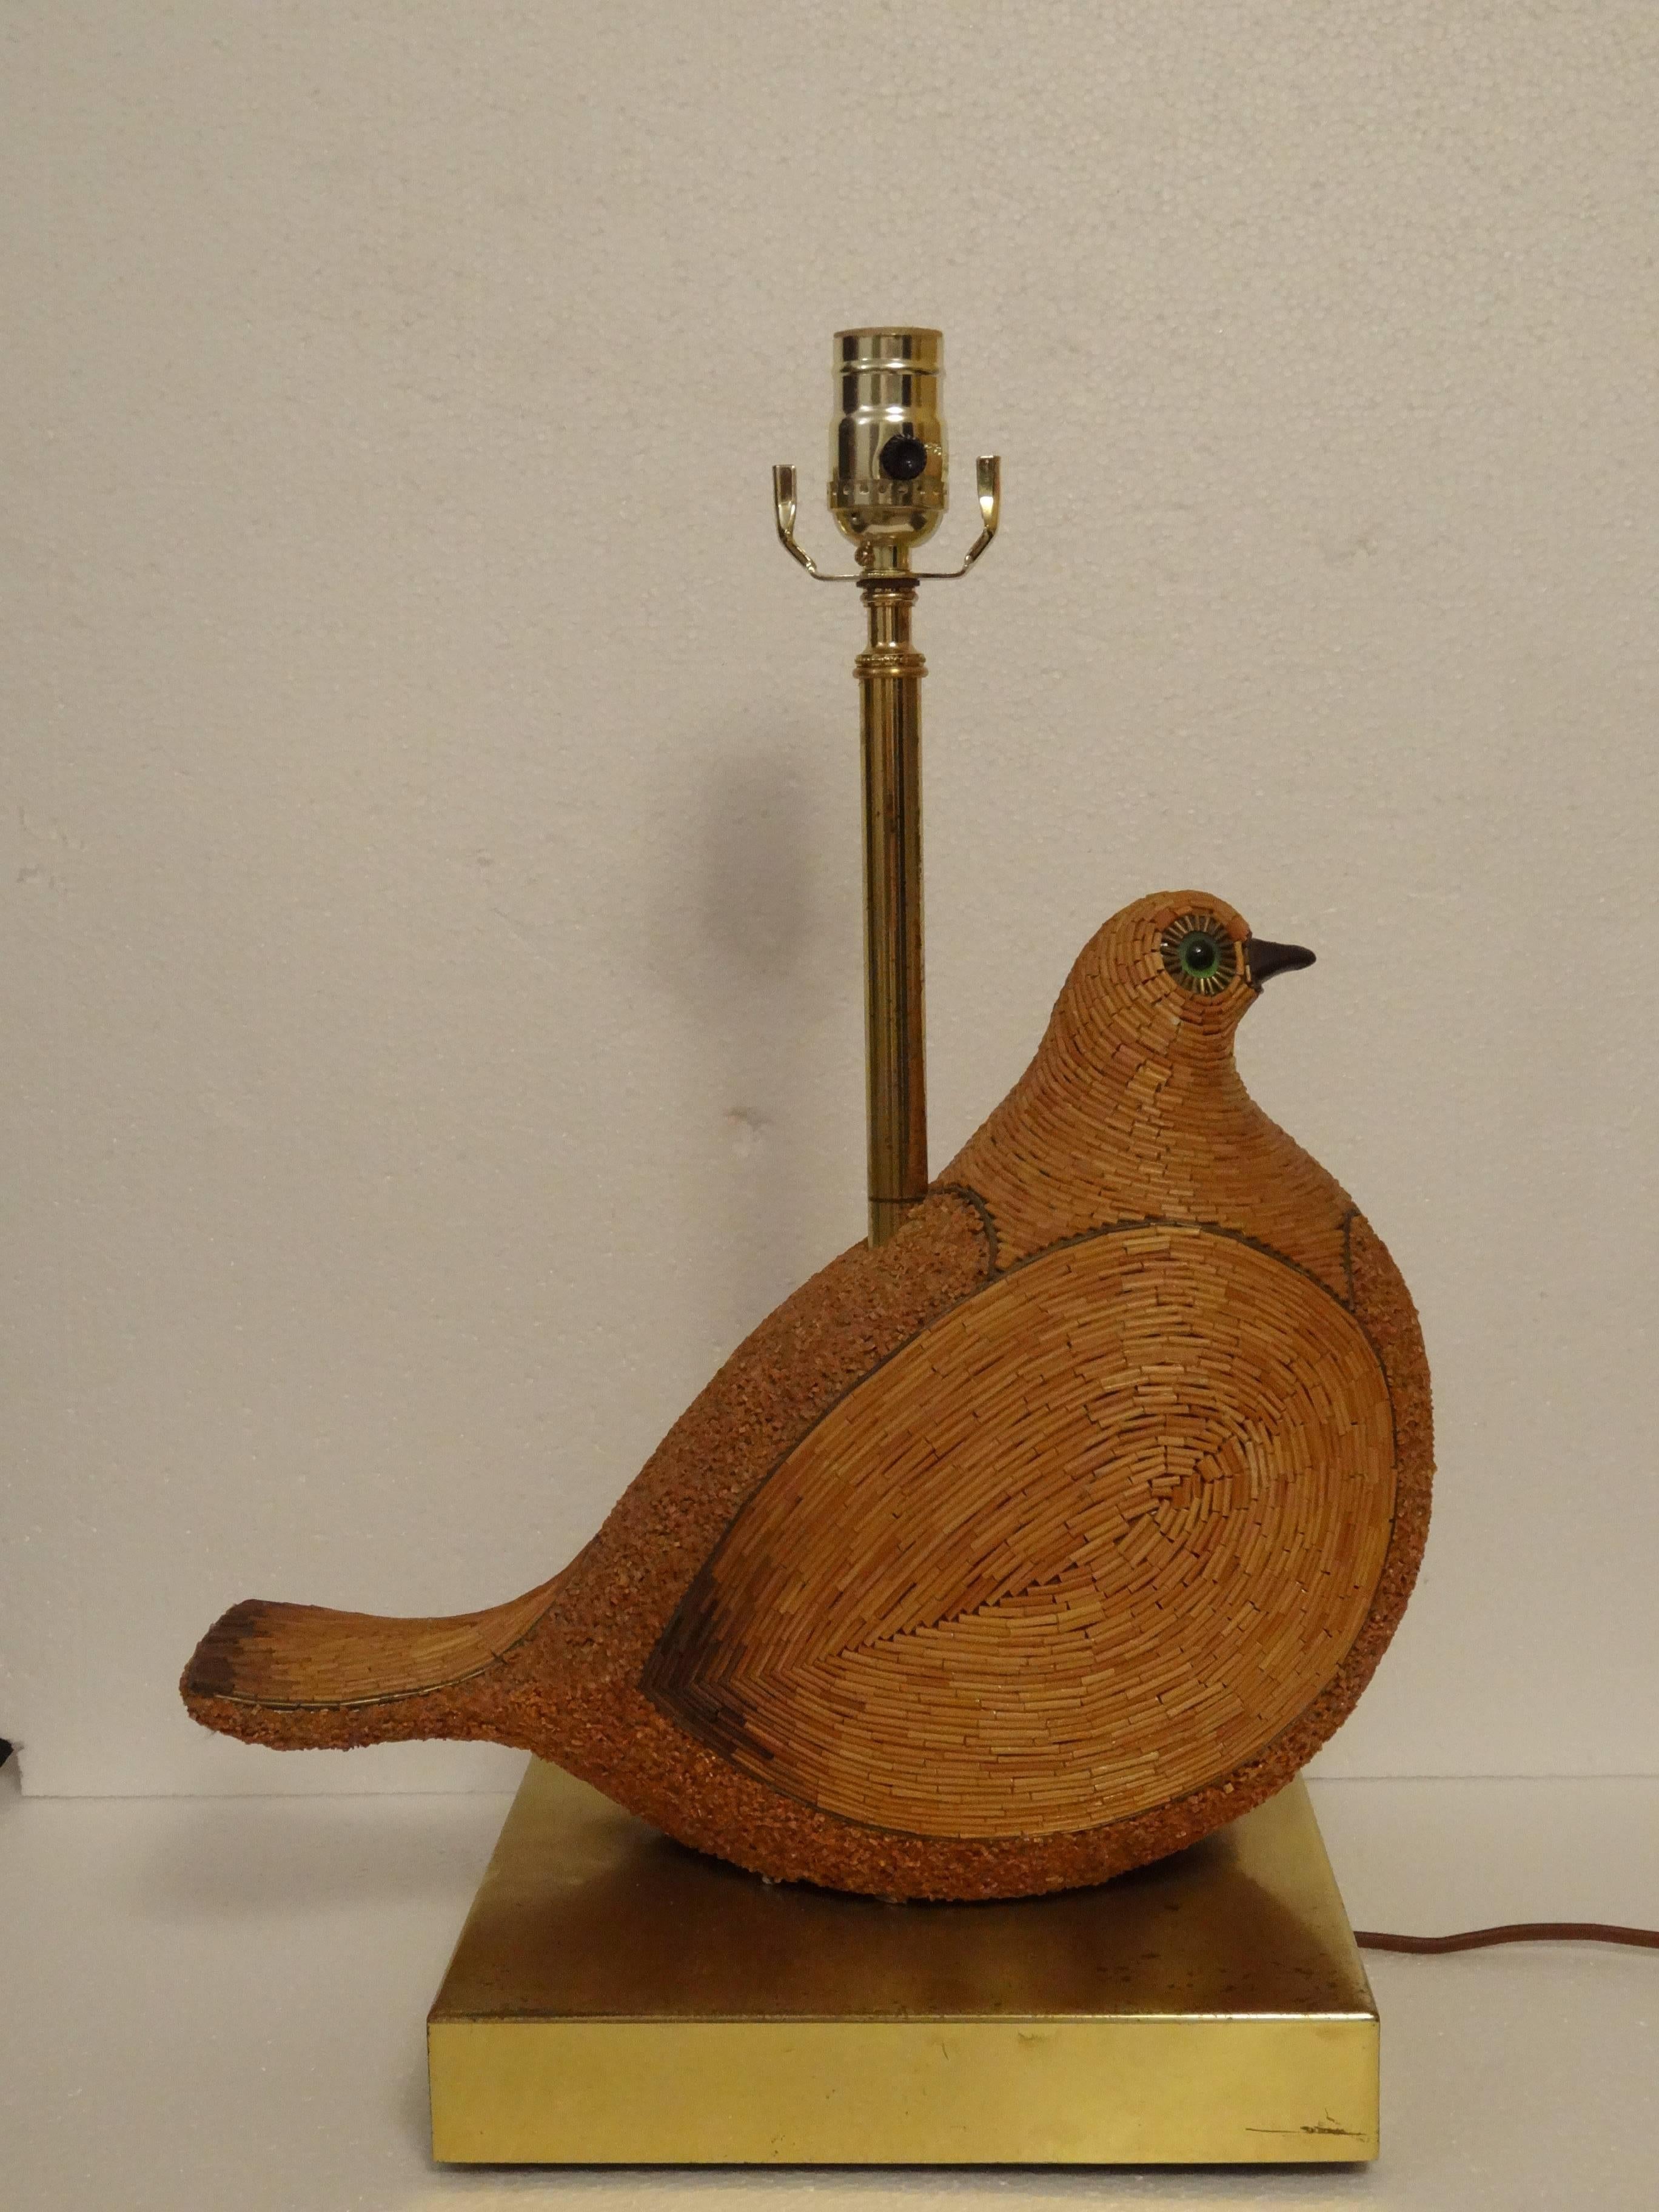 A rare an unusual lamp in the form of a dove.
This lamp has been hand fitted with reed and inlaid with brass.
Incredible detail and craftsmanship in creating this work.
The brass plated metal base compliments the sculpture and materials